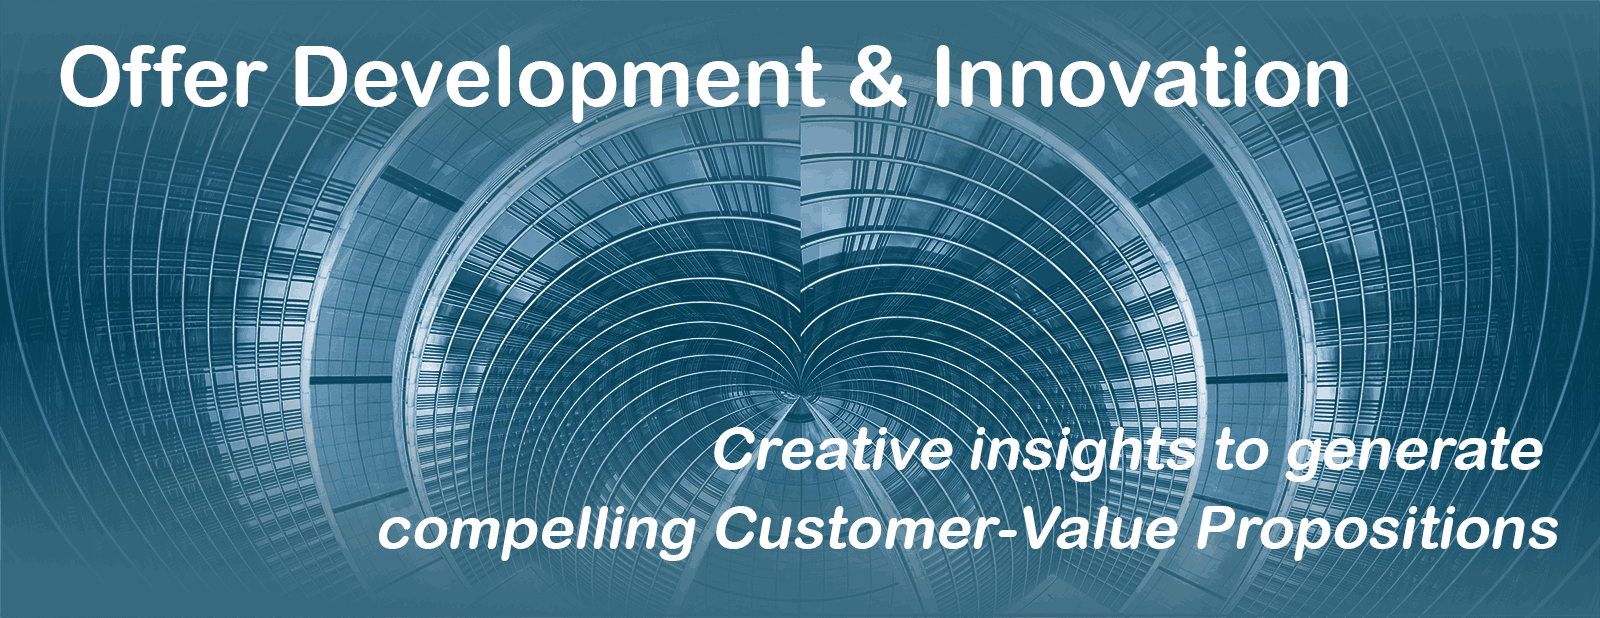 Offer Development & Innovation - Creative insights to generate compelling Customer Value propositions